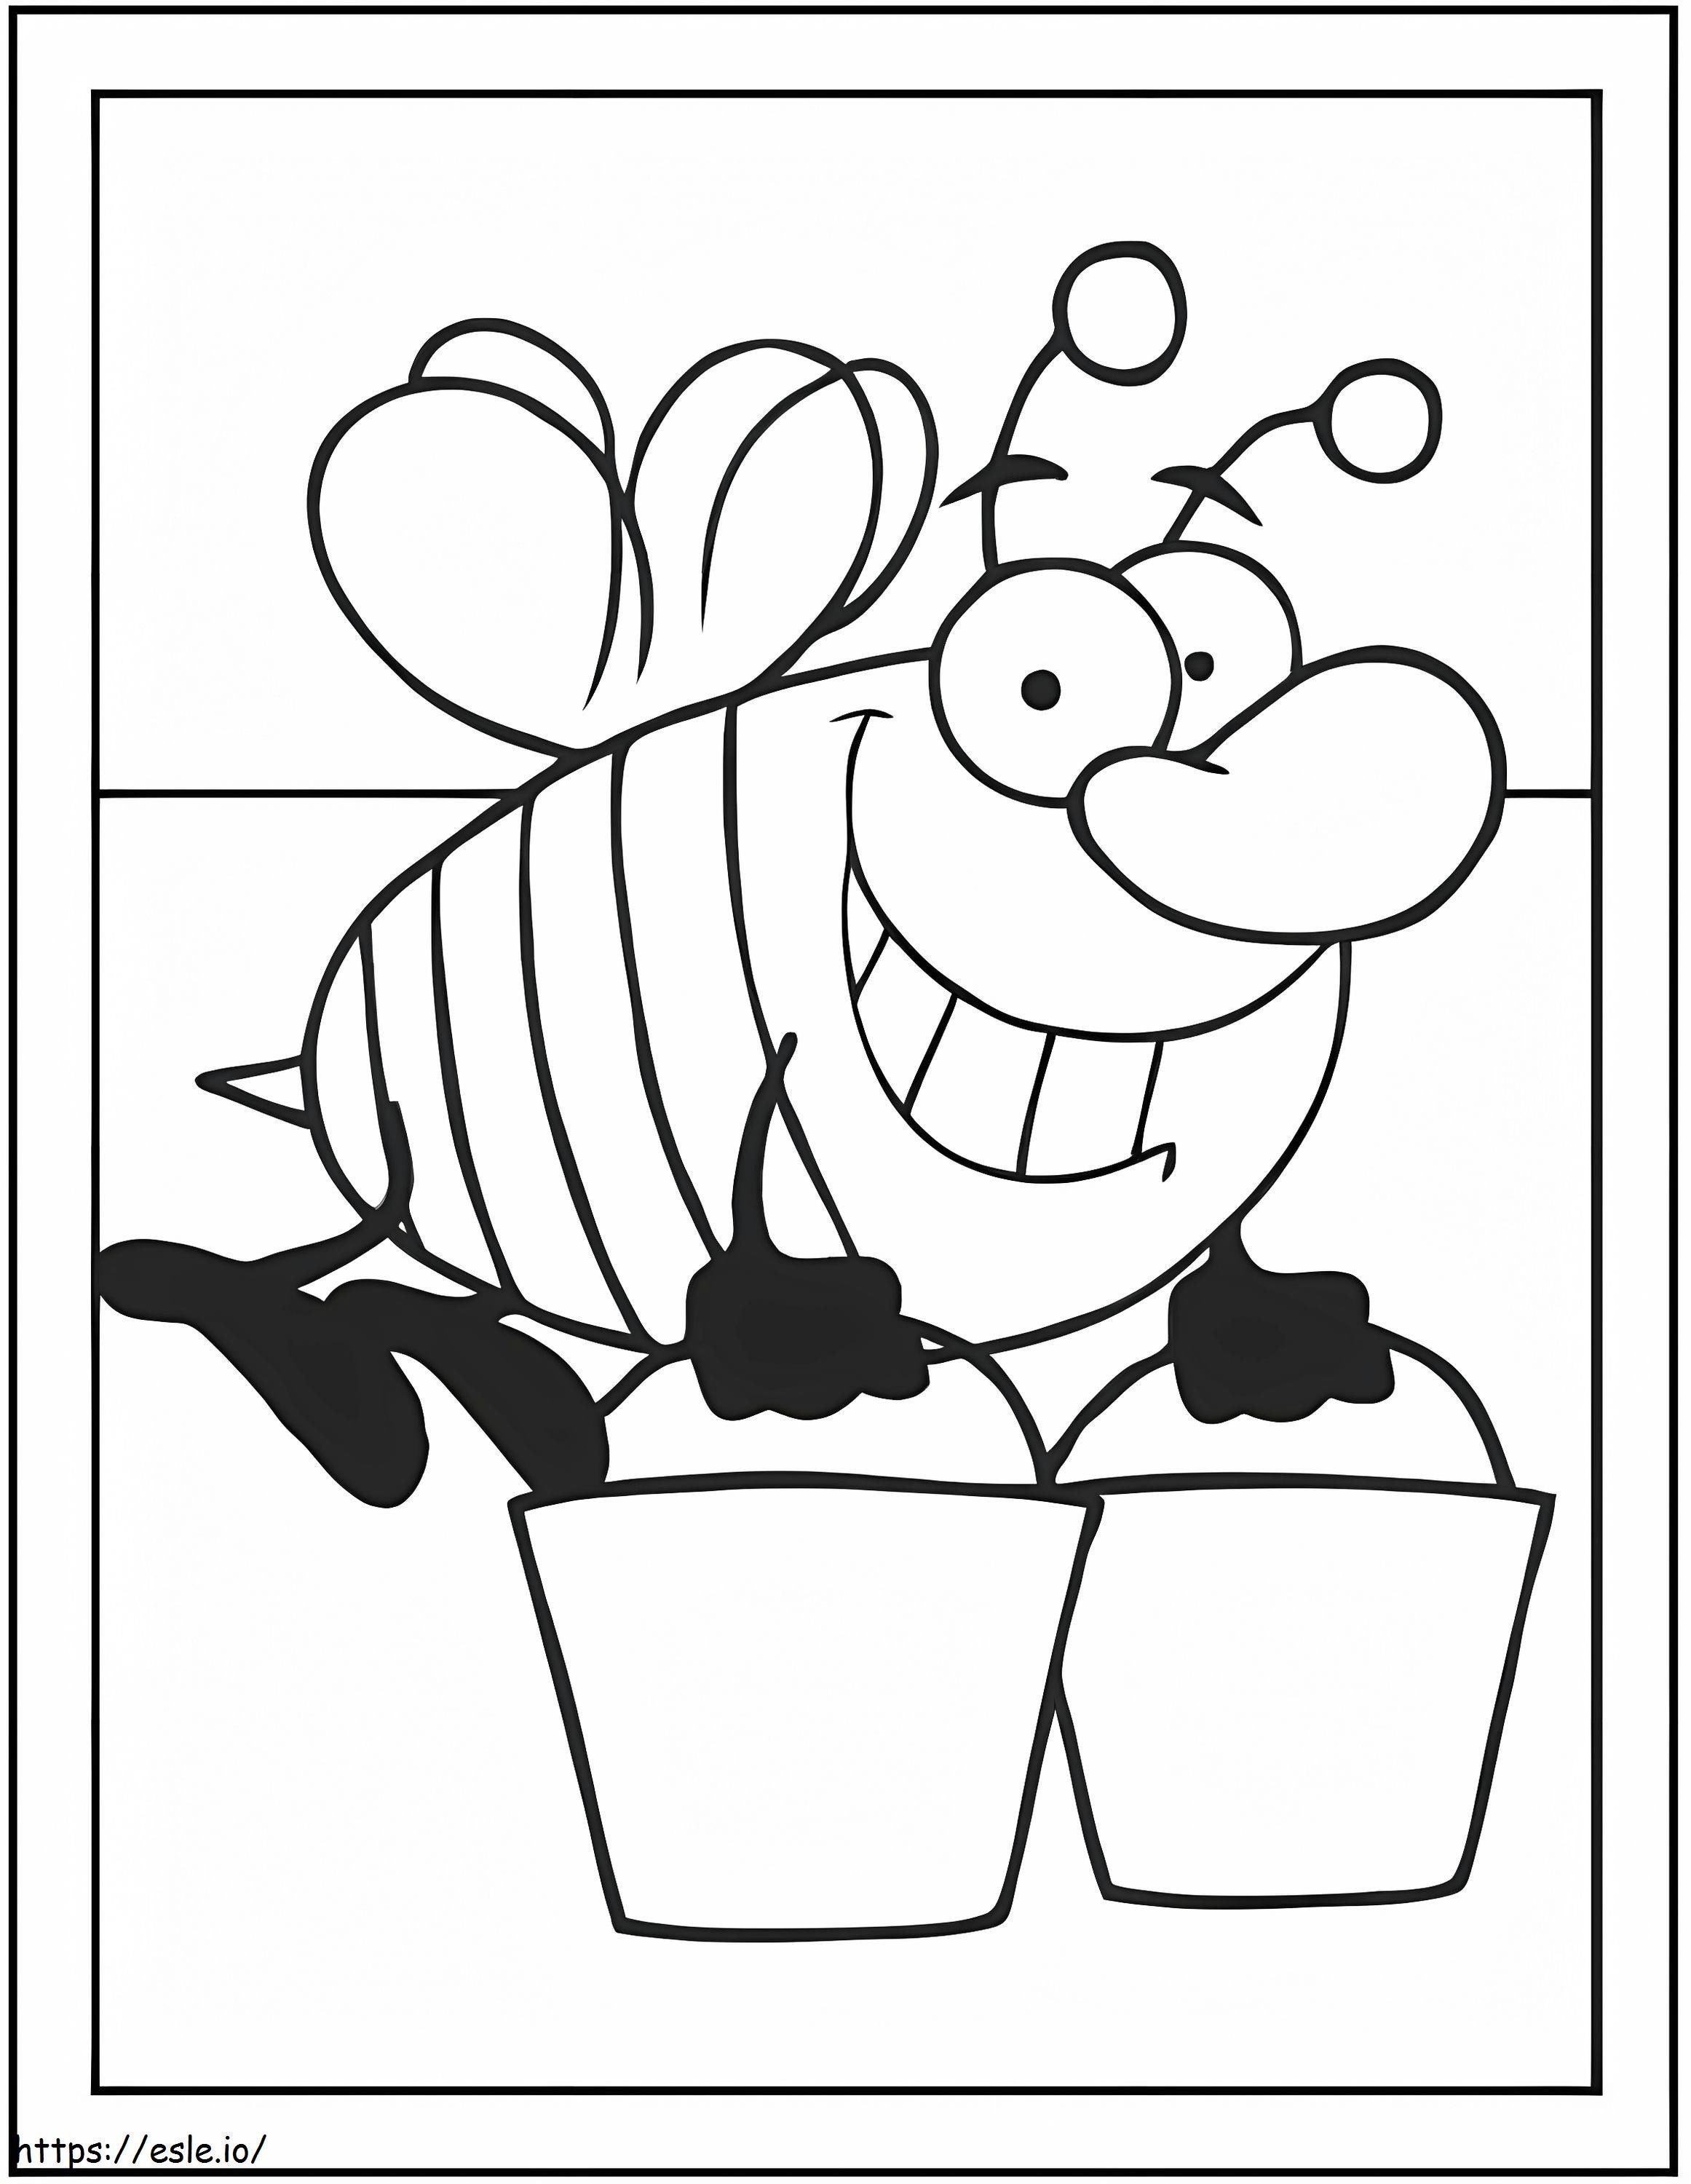 Bee Carrying Two Buckets coloring page